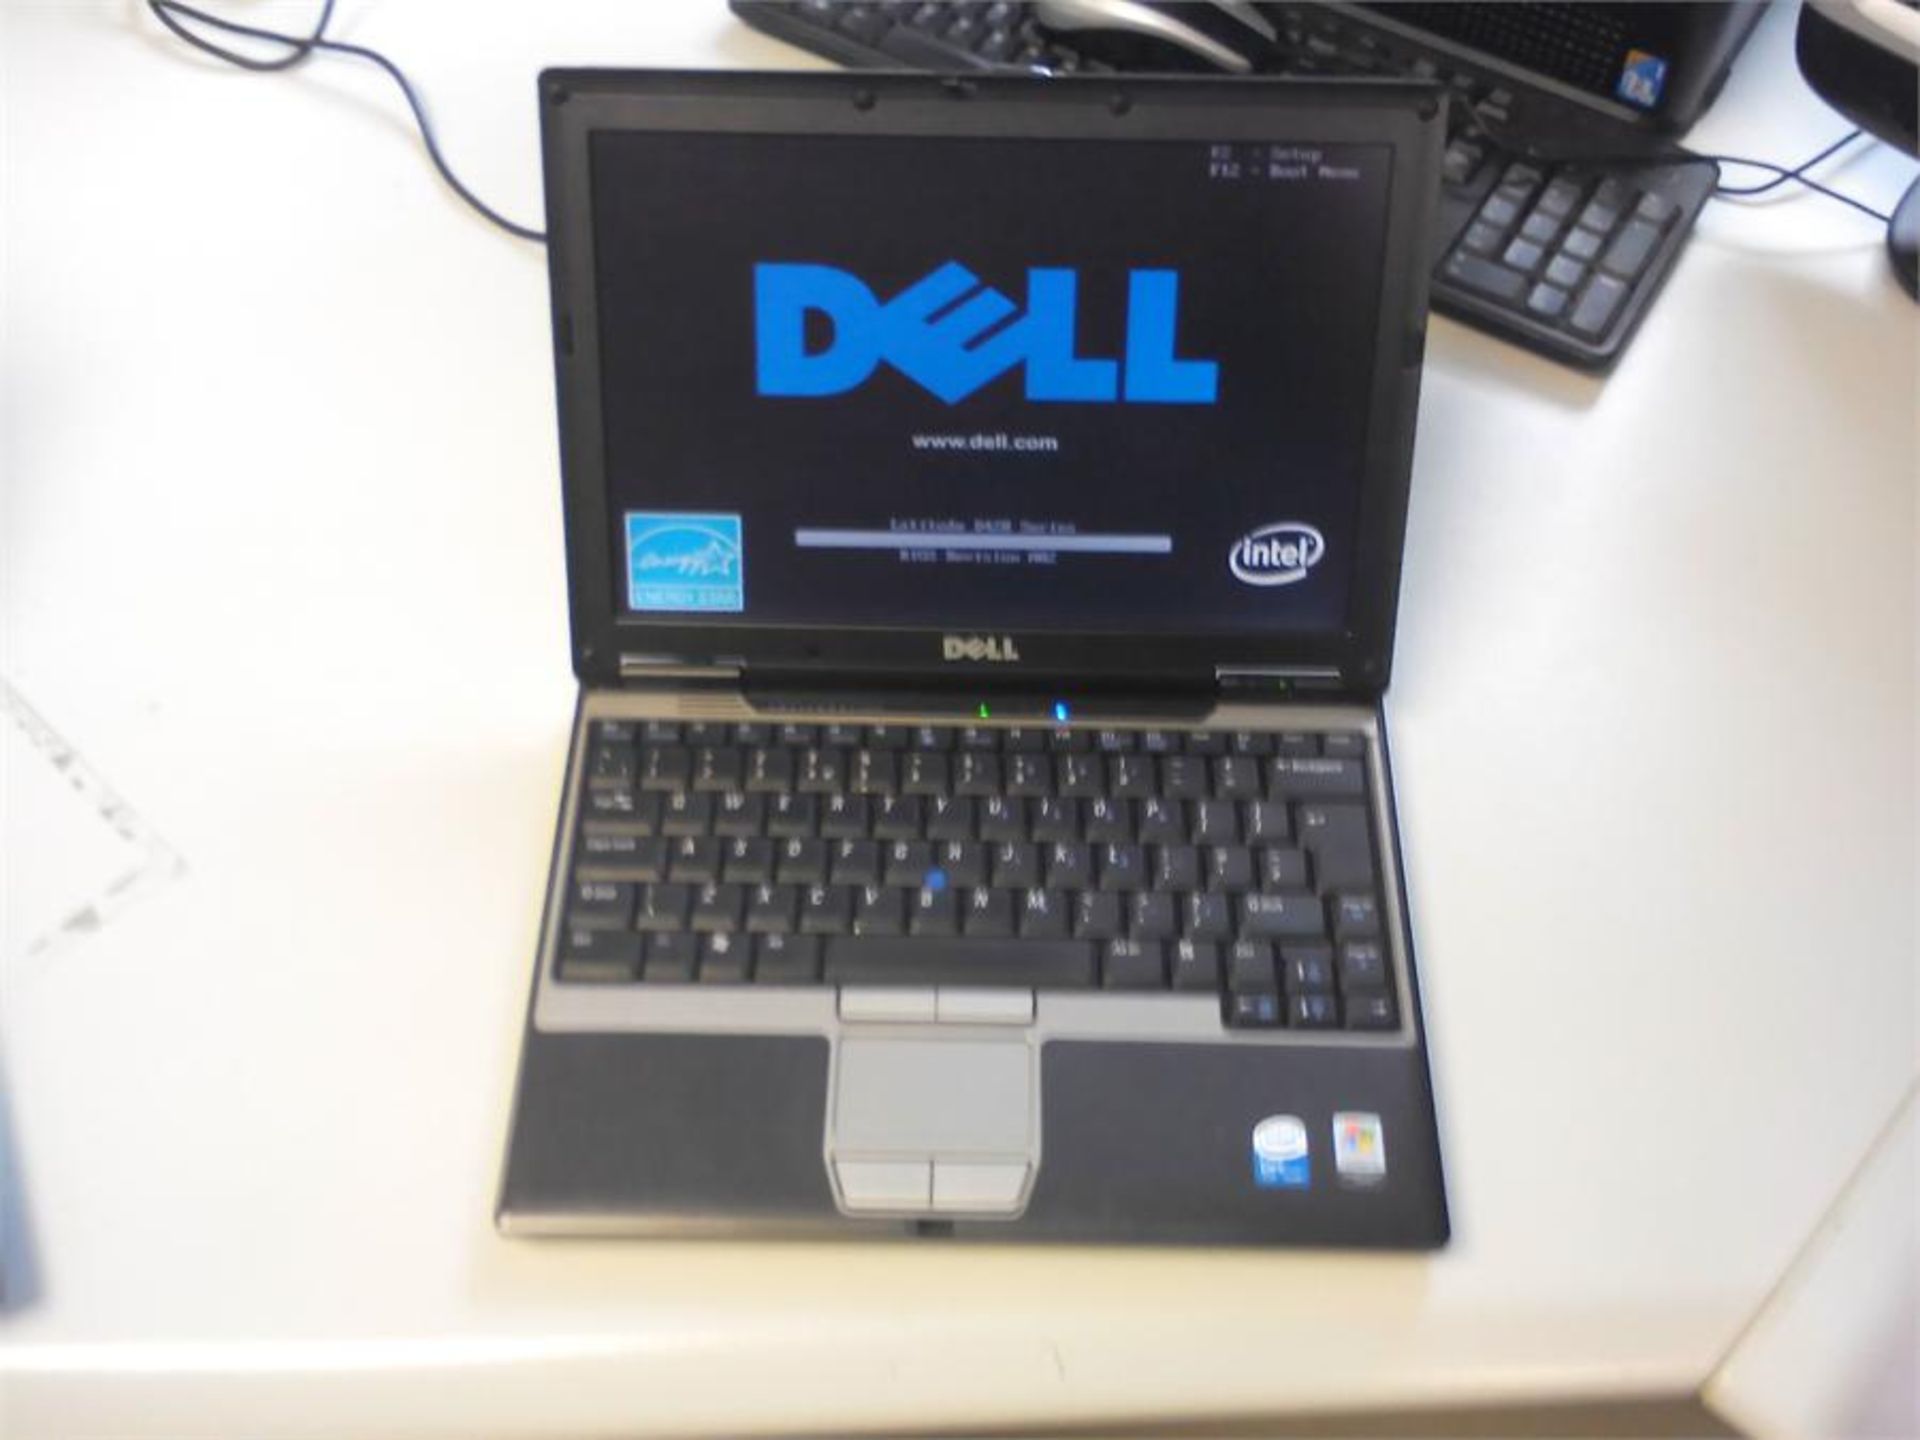 Dell D420 Intel Core Duo 1.2Ghz 1.5Gb 80Gb EXT DVD Windows Xp Pro Installed